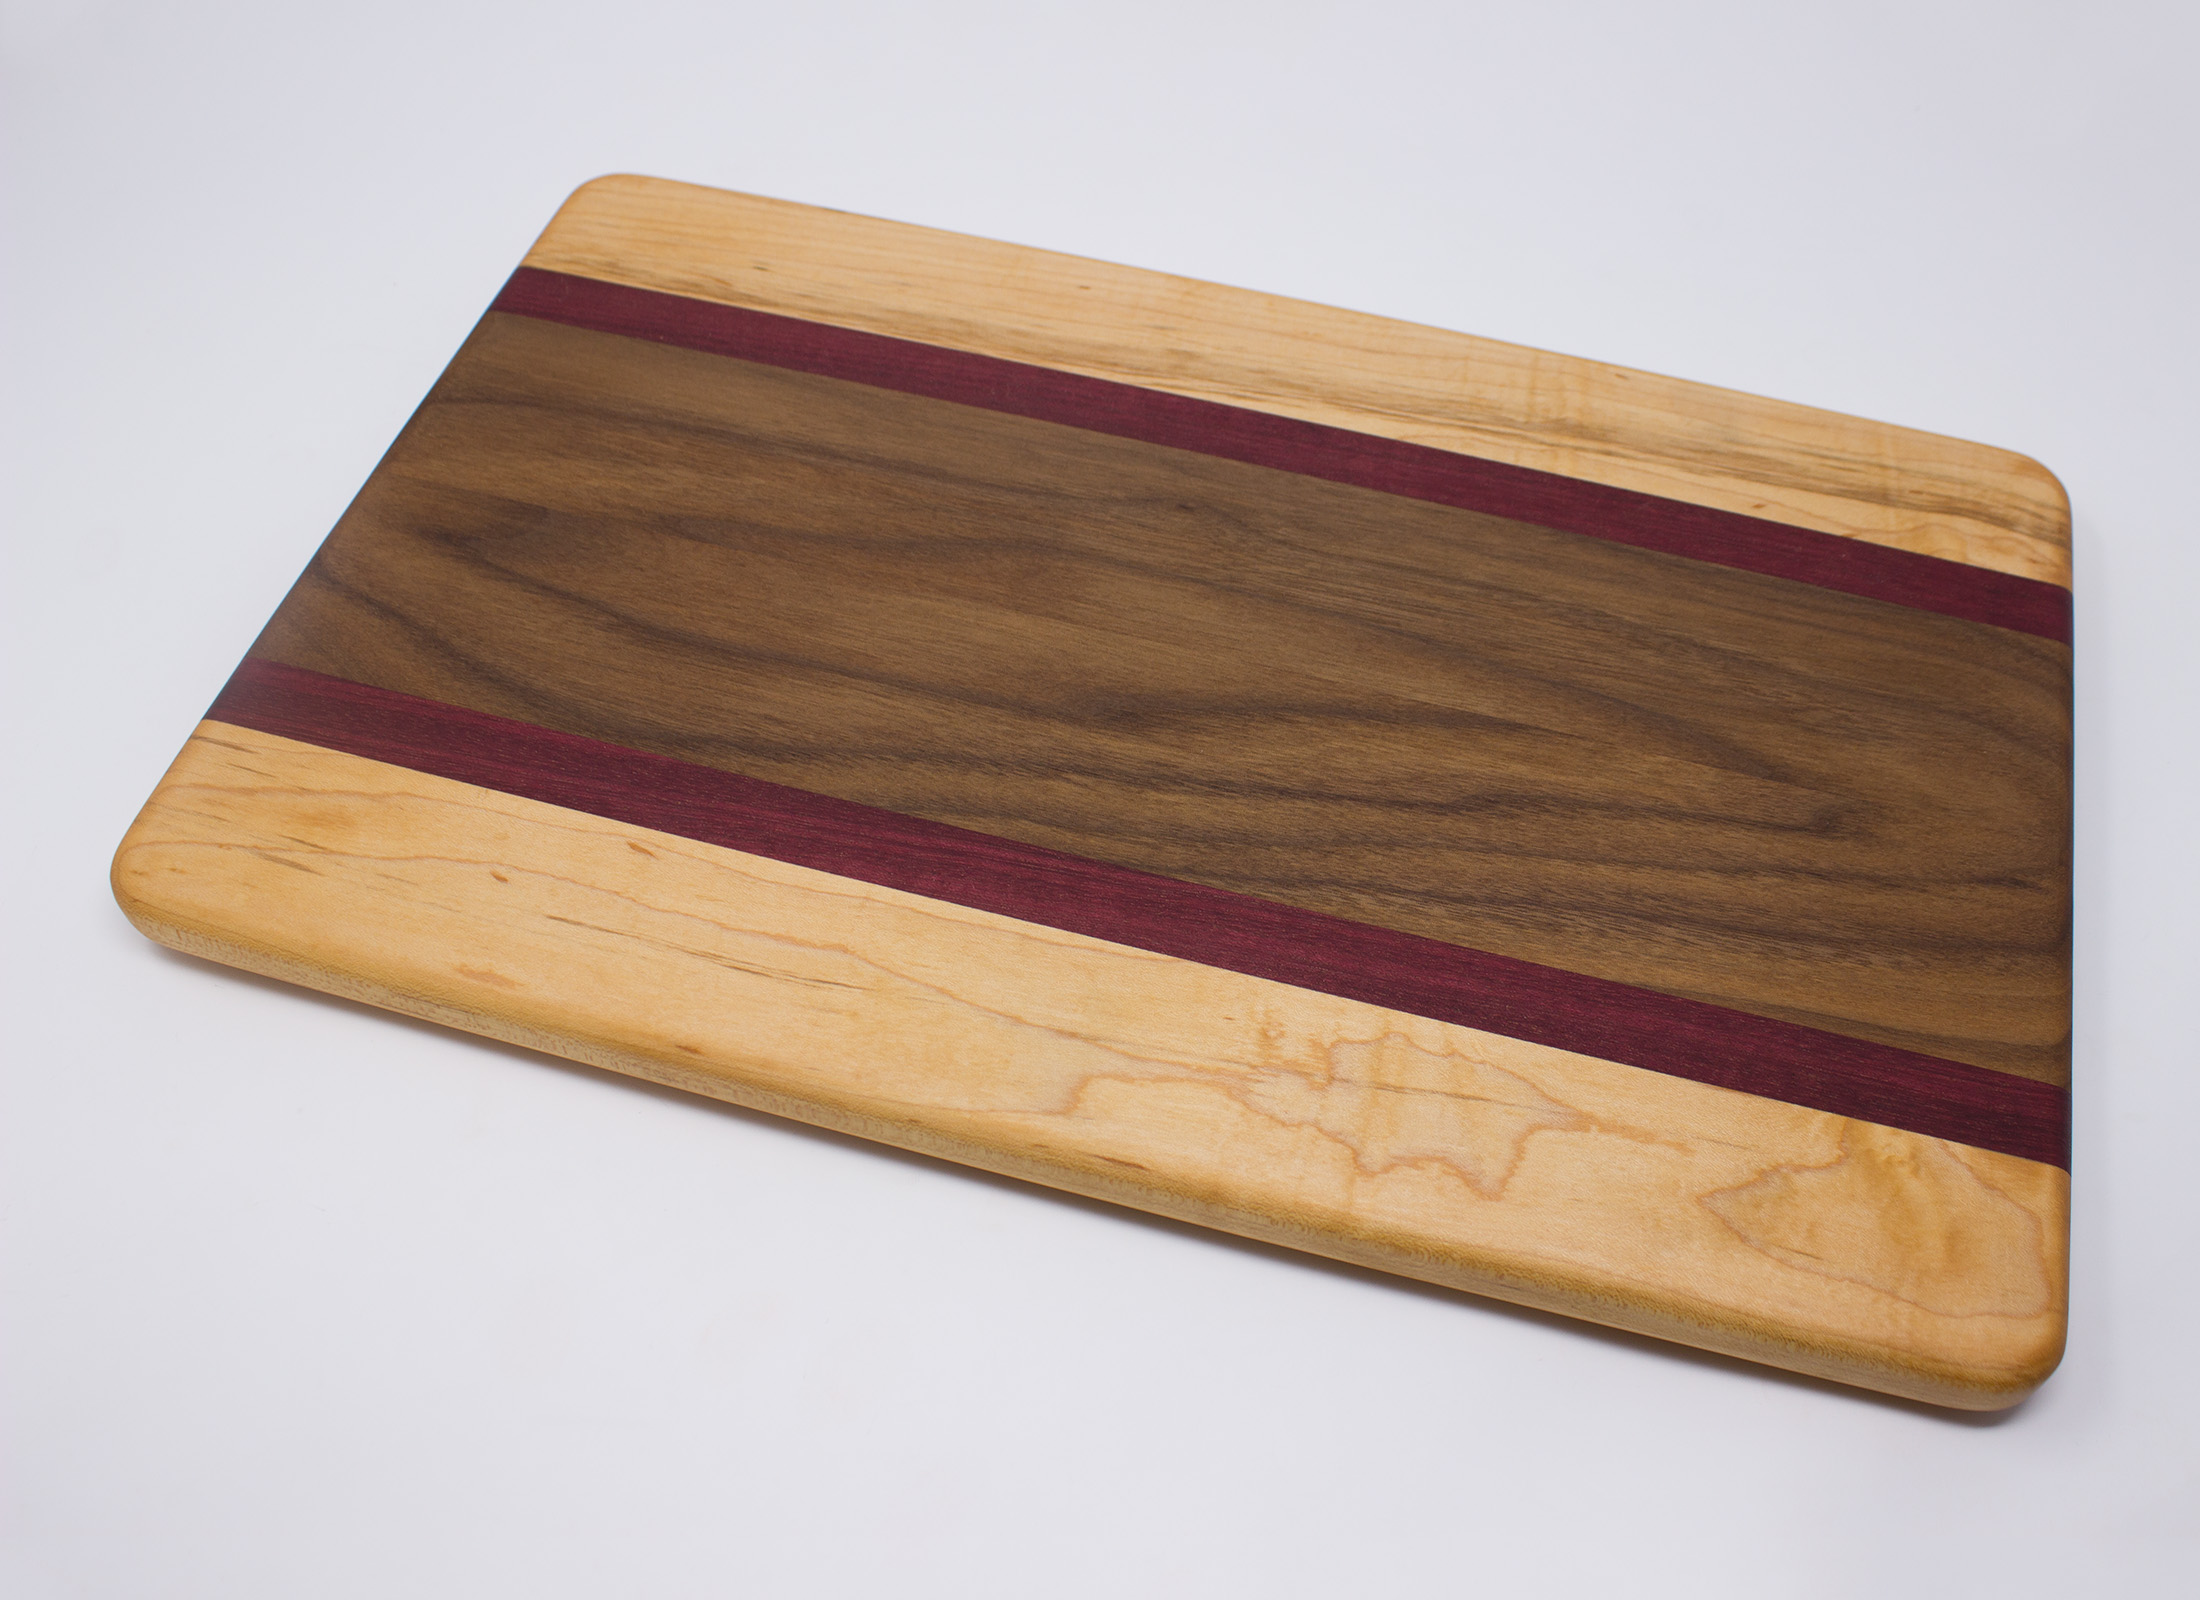 https://www.rockfordwoodcrafts.com/wp-content/uploads/Walnut-with-Purple-Stripes-and-Maple-Edges-Top-Angled.jpg